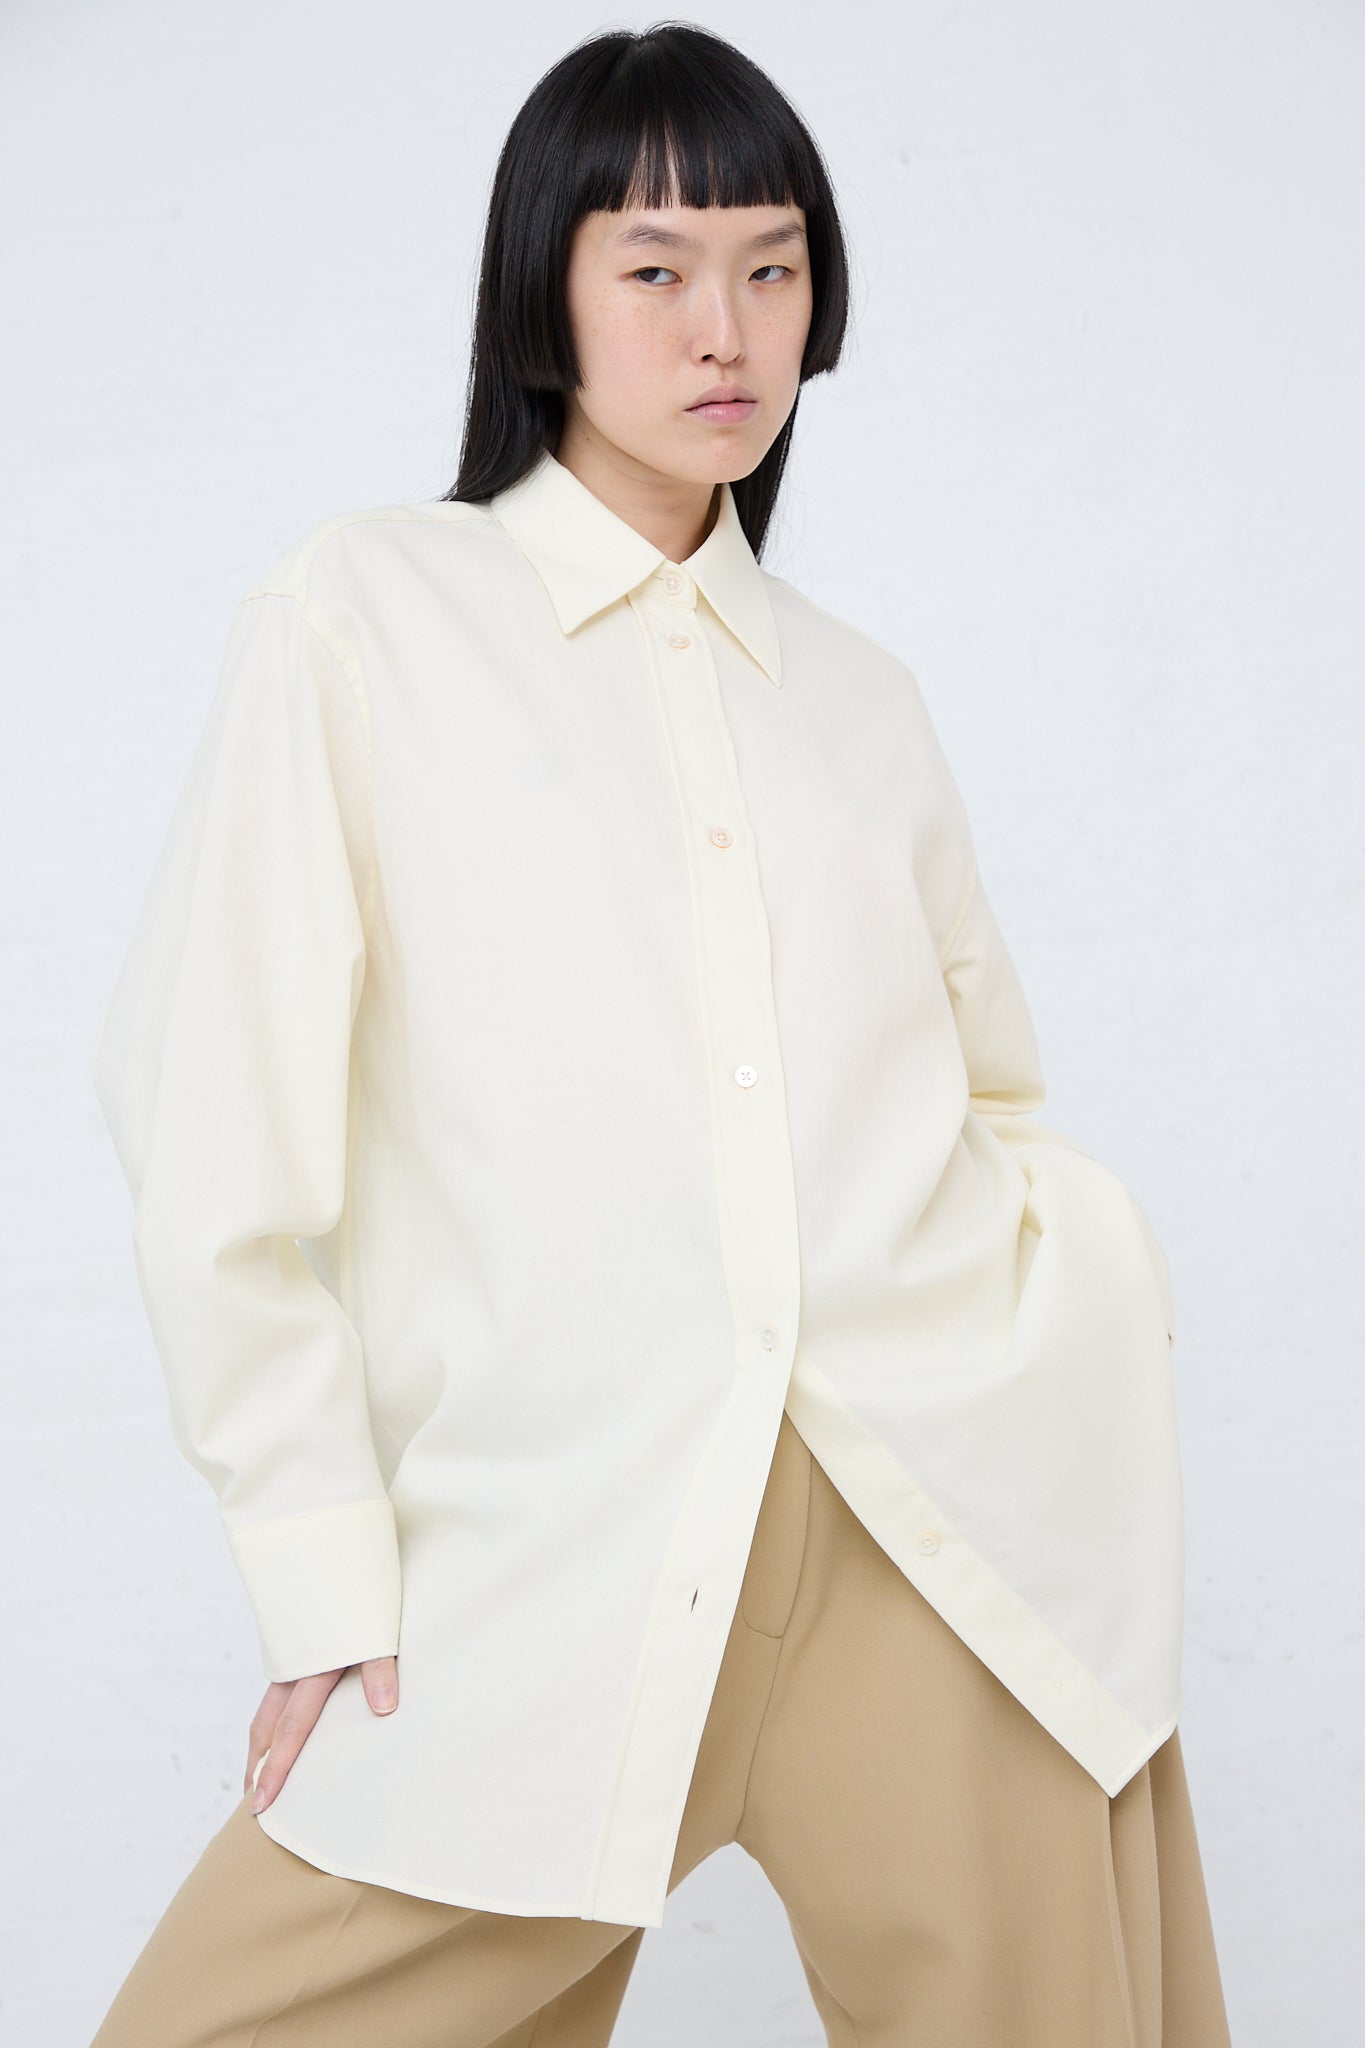 The model is wearing the Santos Overshirt in Parchment by Studio Nicholson.